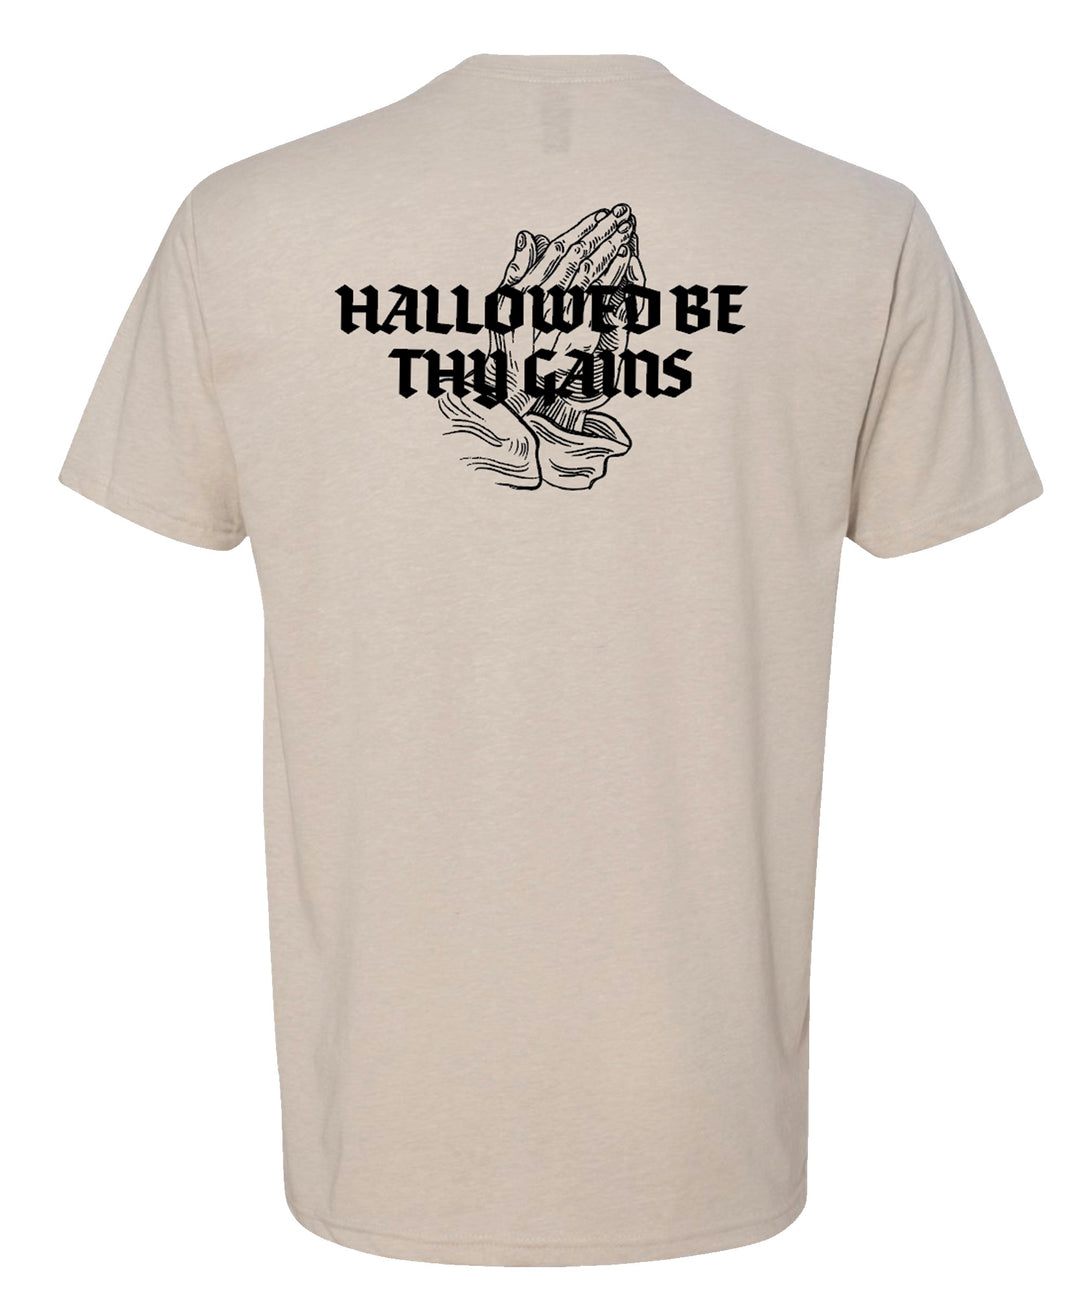 "Hallowed Be Thy Gains" T-Shirt